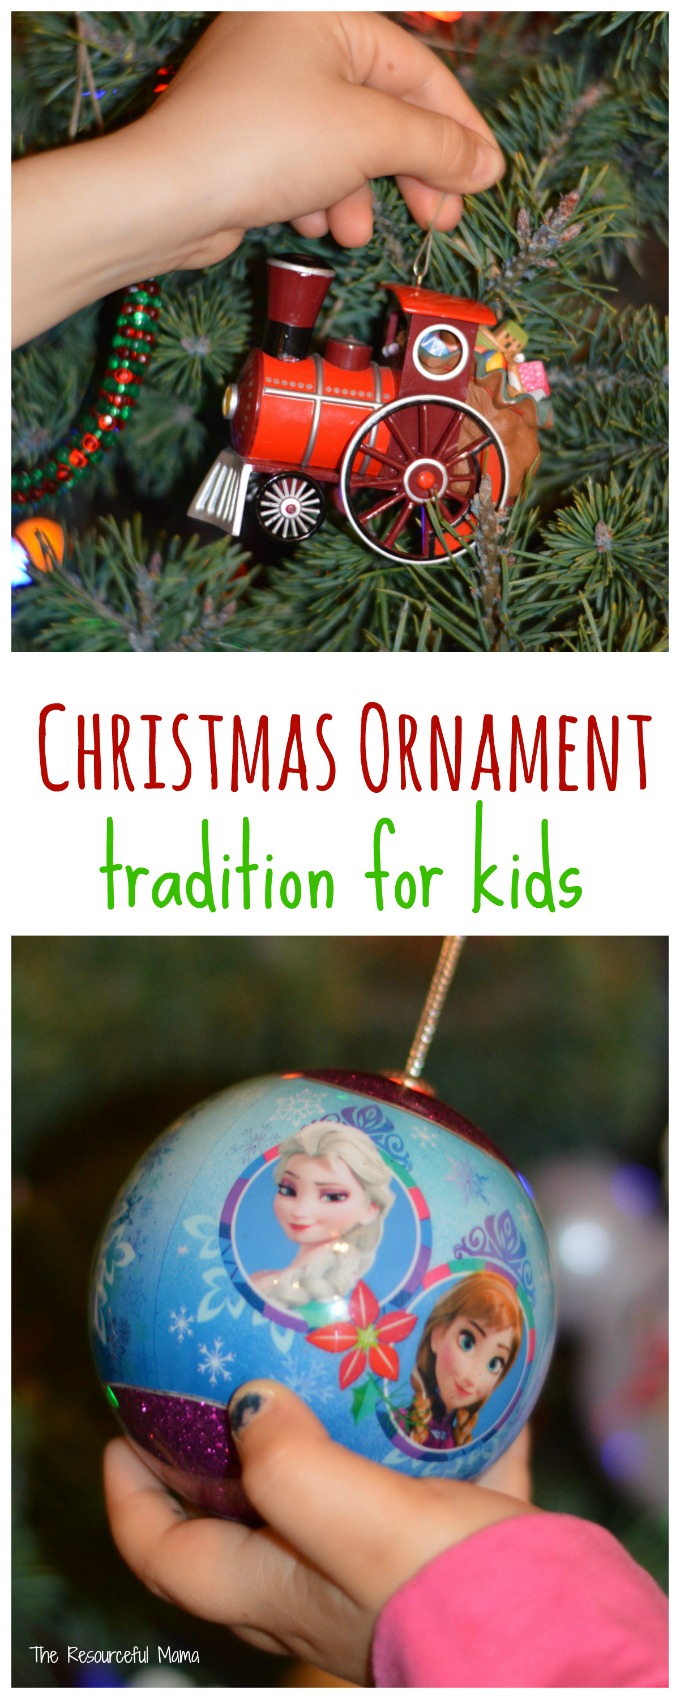 ornament-tradition-for-kids